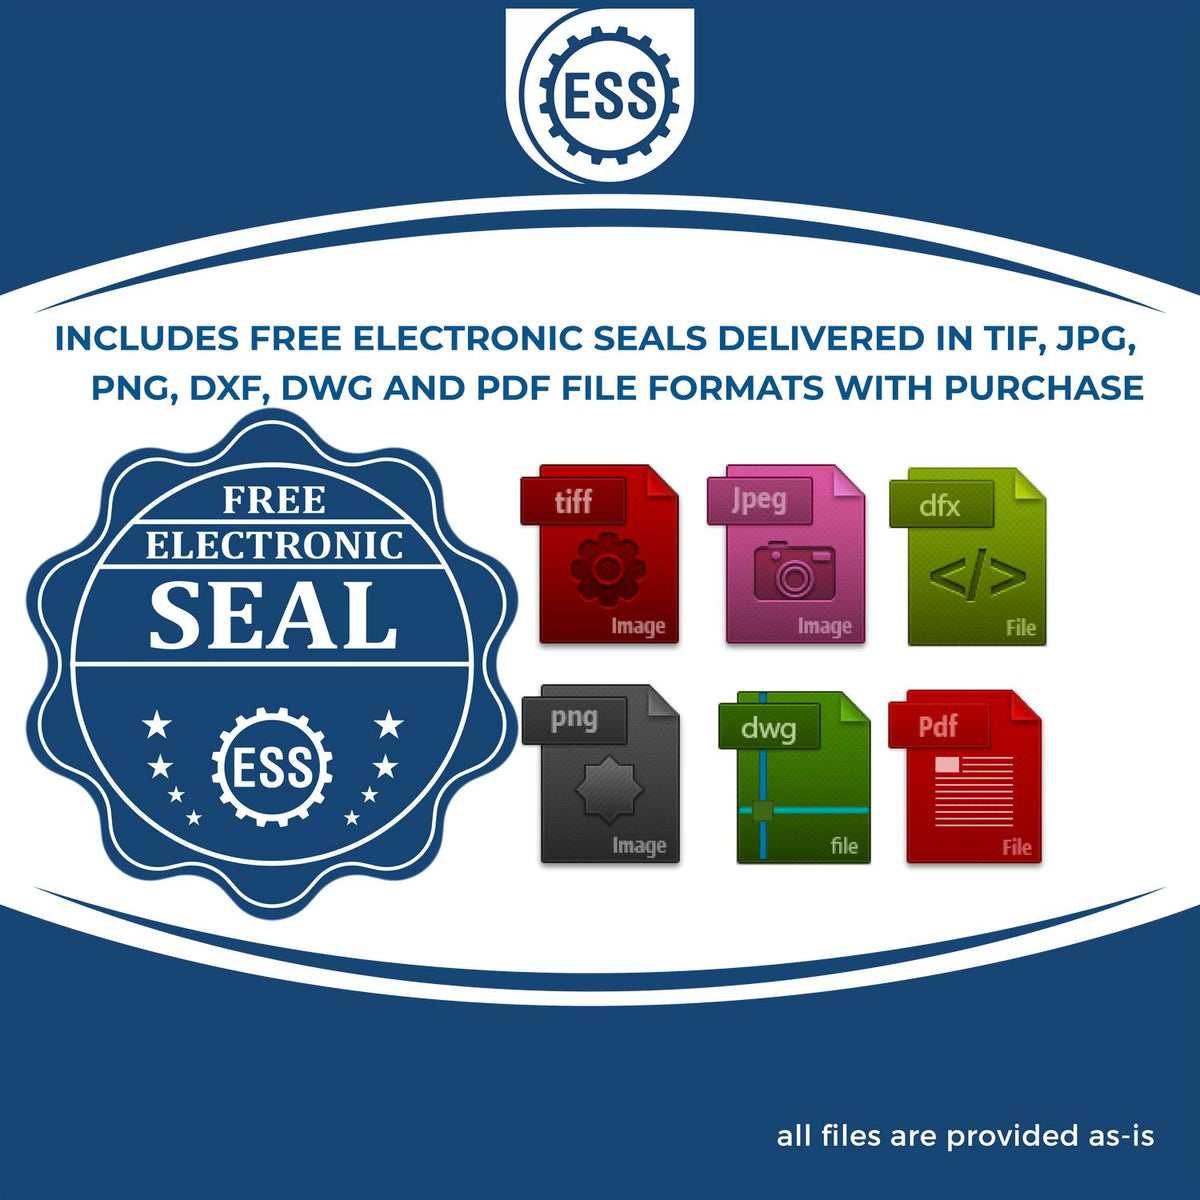 An infographic for the free electronic seal for the Self-Inking Massachusetts Geologist Stamp illustrating the different file type icons such as DXF, DWG, TIF, JPG and PNG.